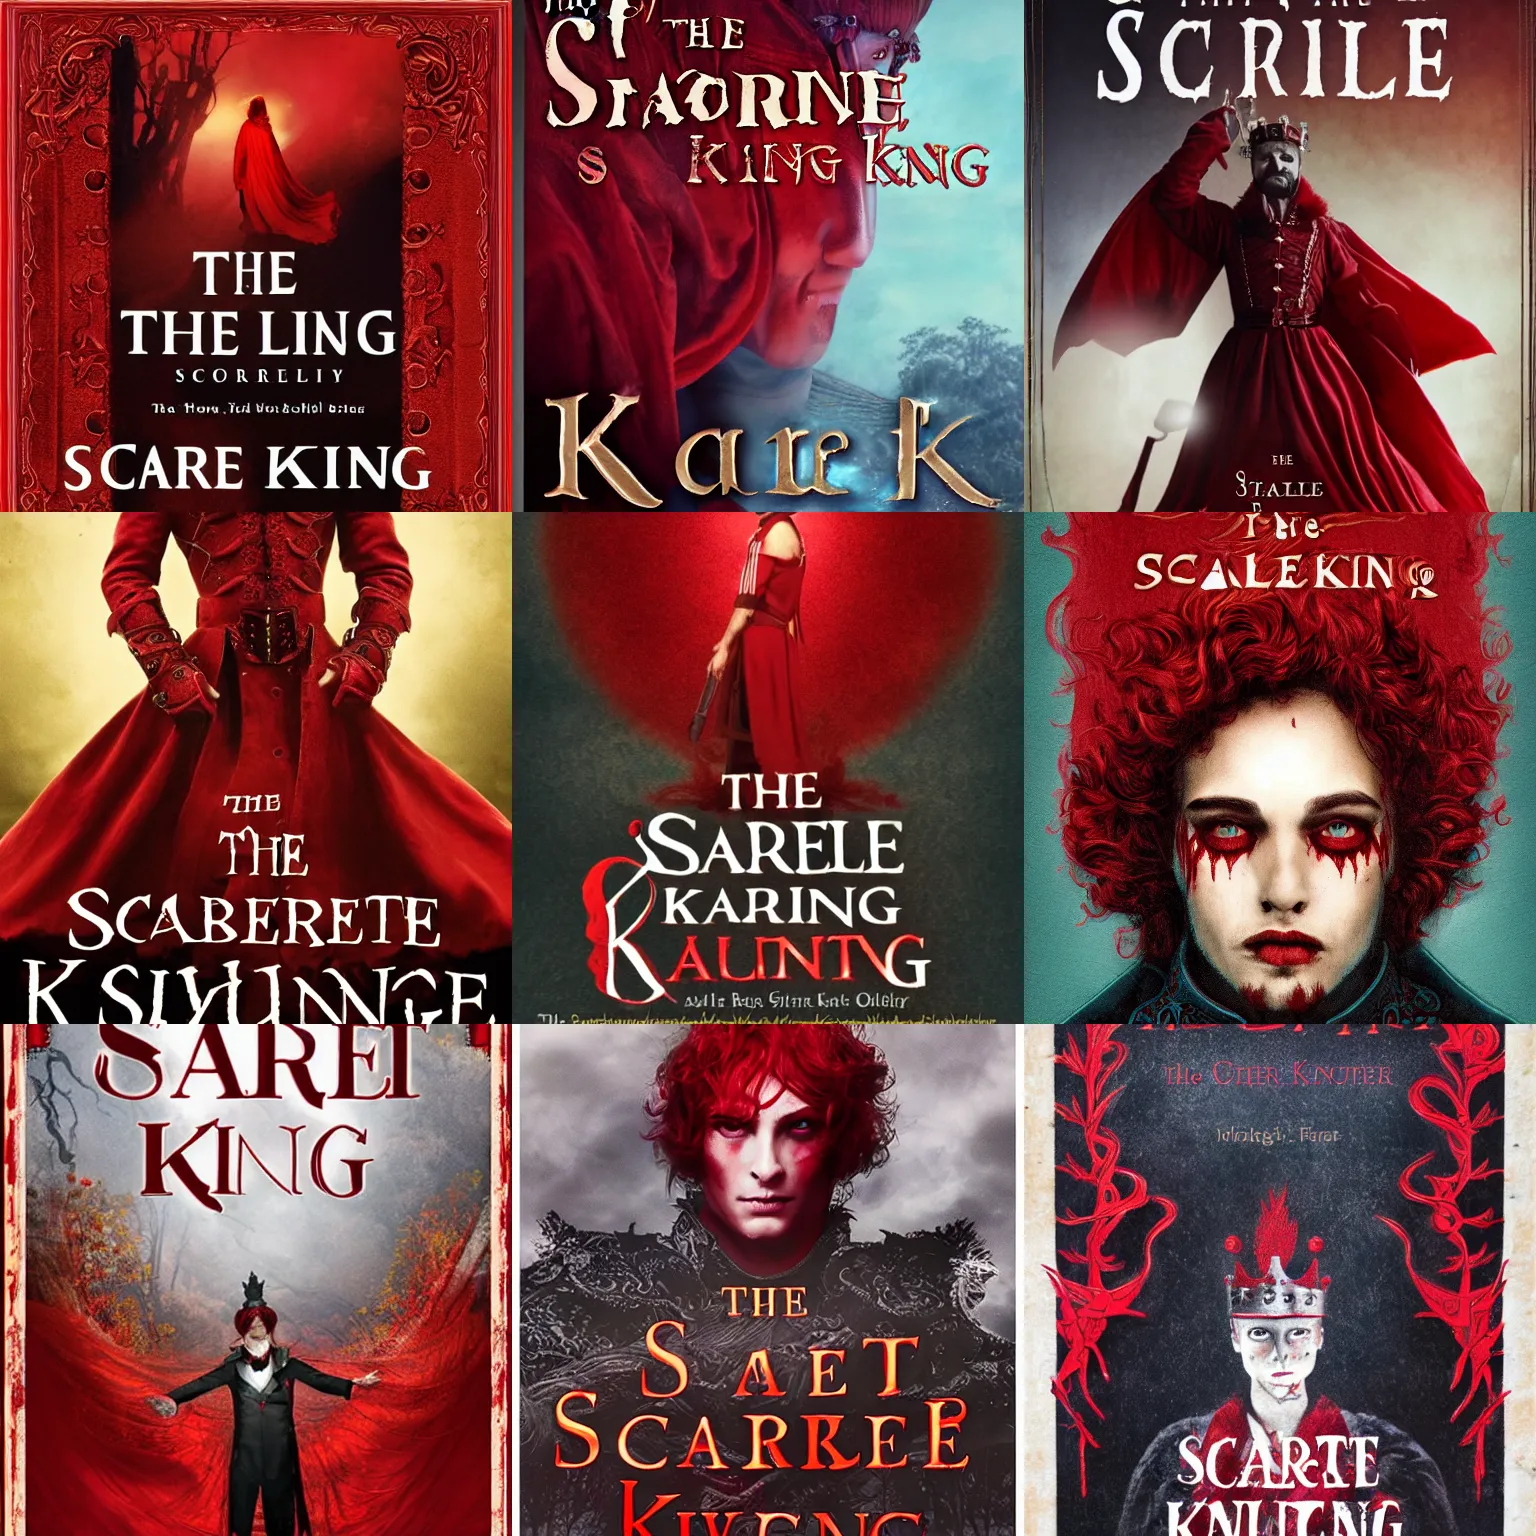 Prompt: The scarlet king